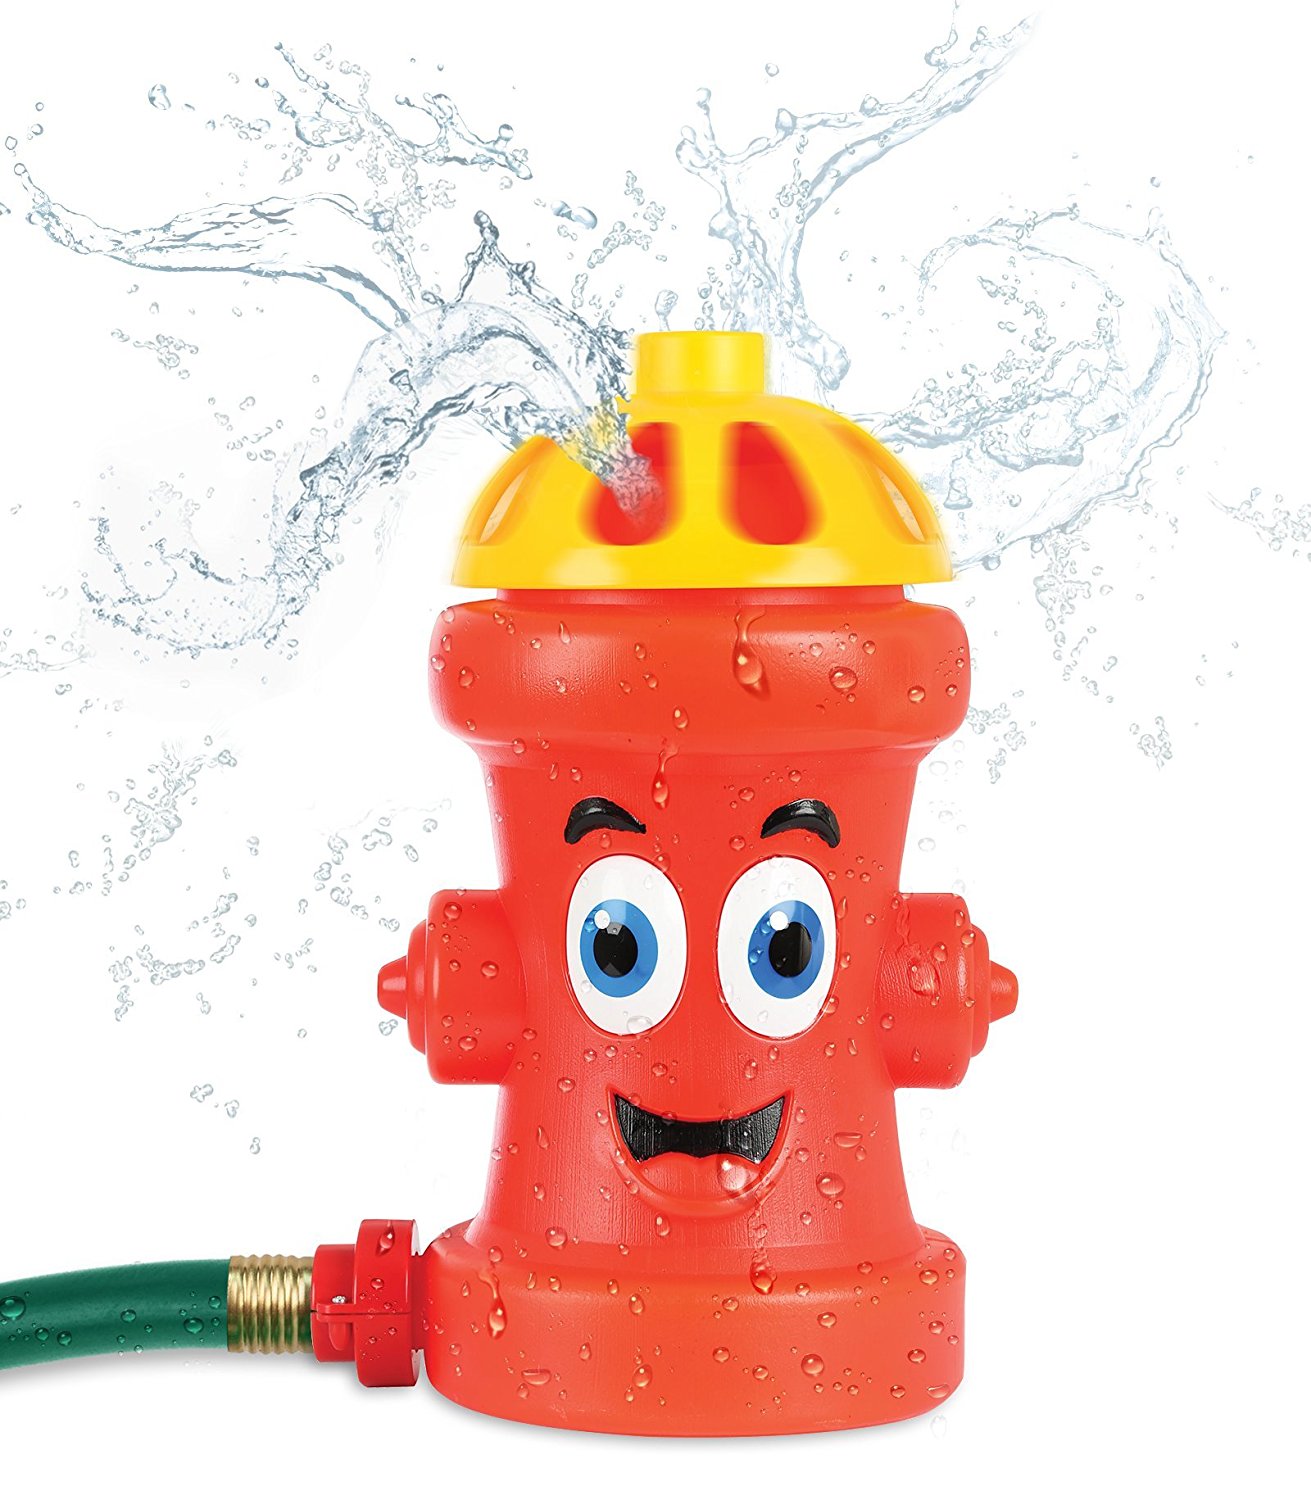 Amazon.com: Kleeger Fire Hydrant Sprinkler Toy For Kids: Family ...